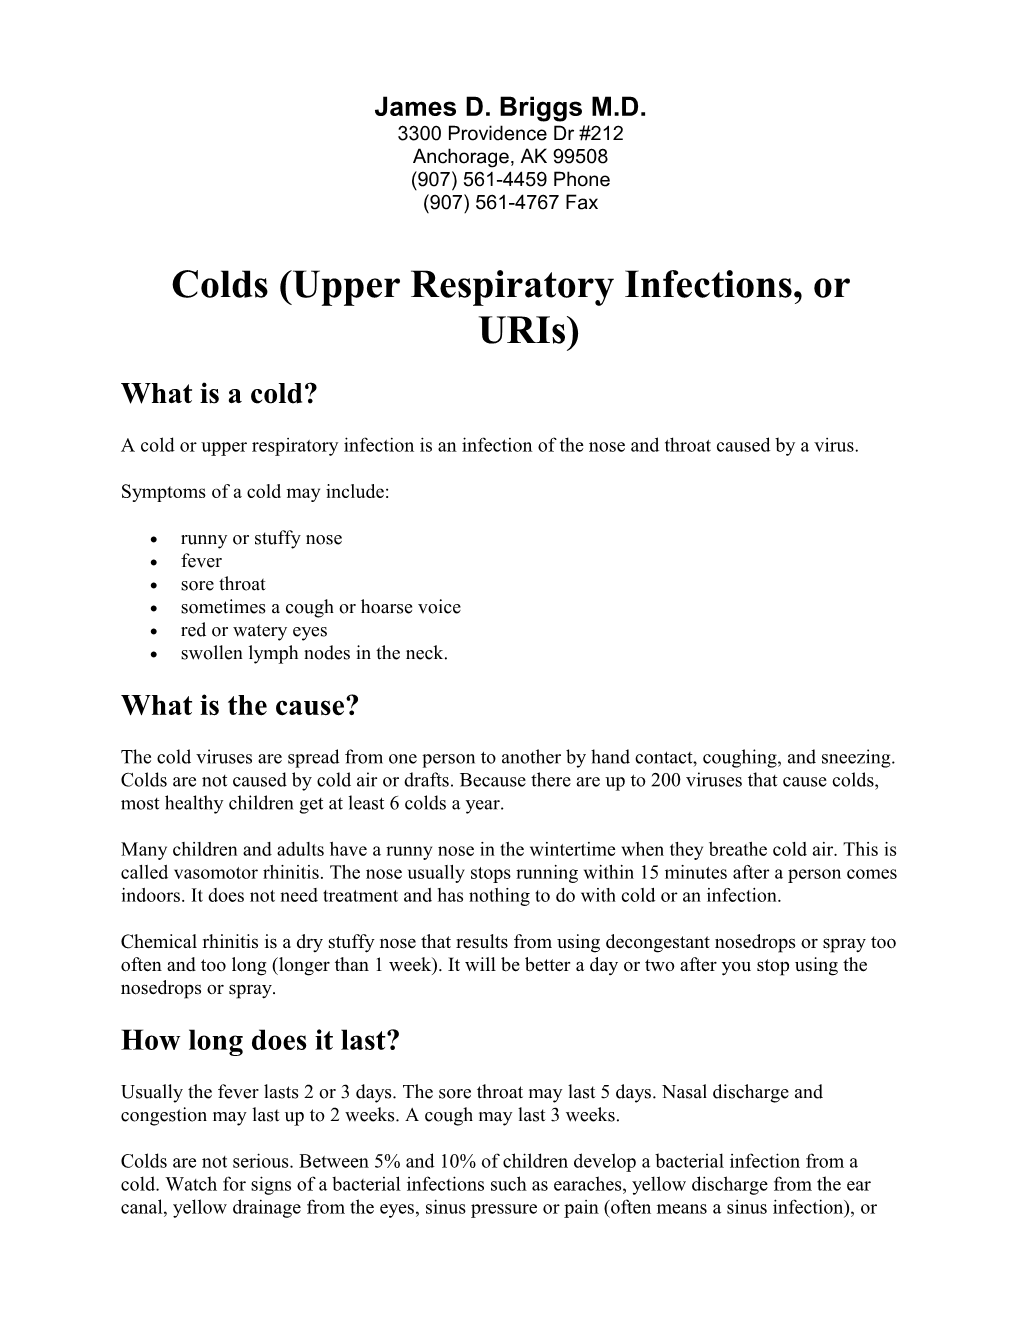 Colds (Upper Respiratory Infections, Or Uris)